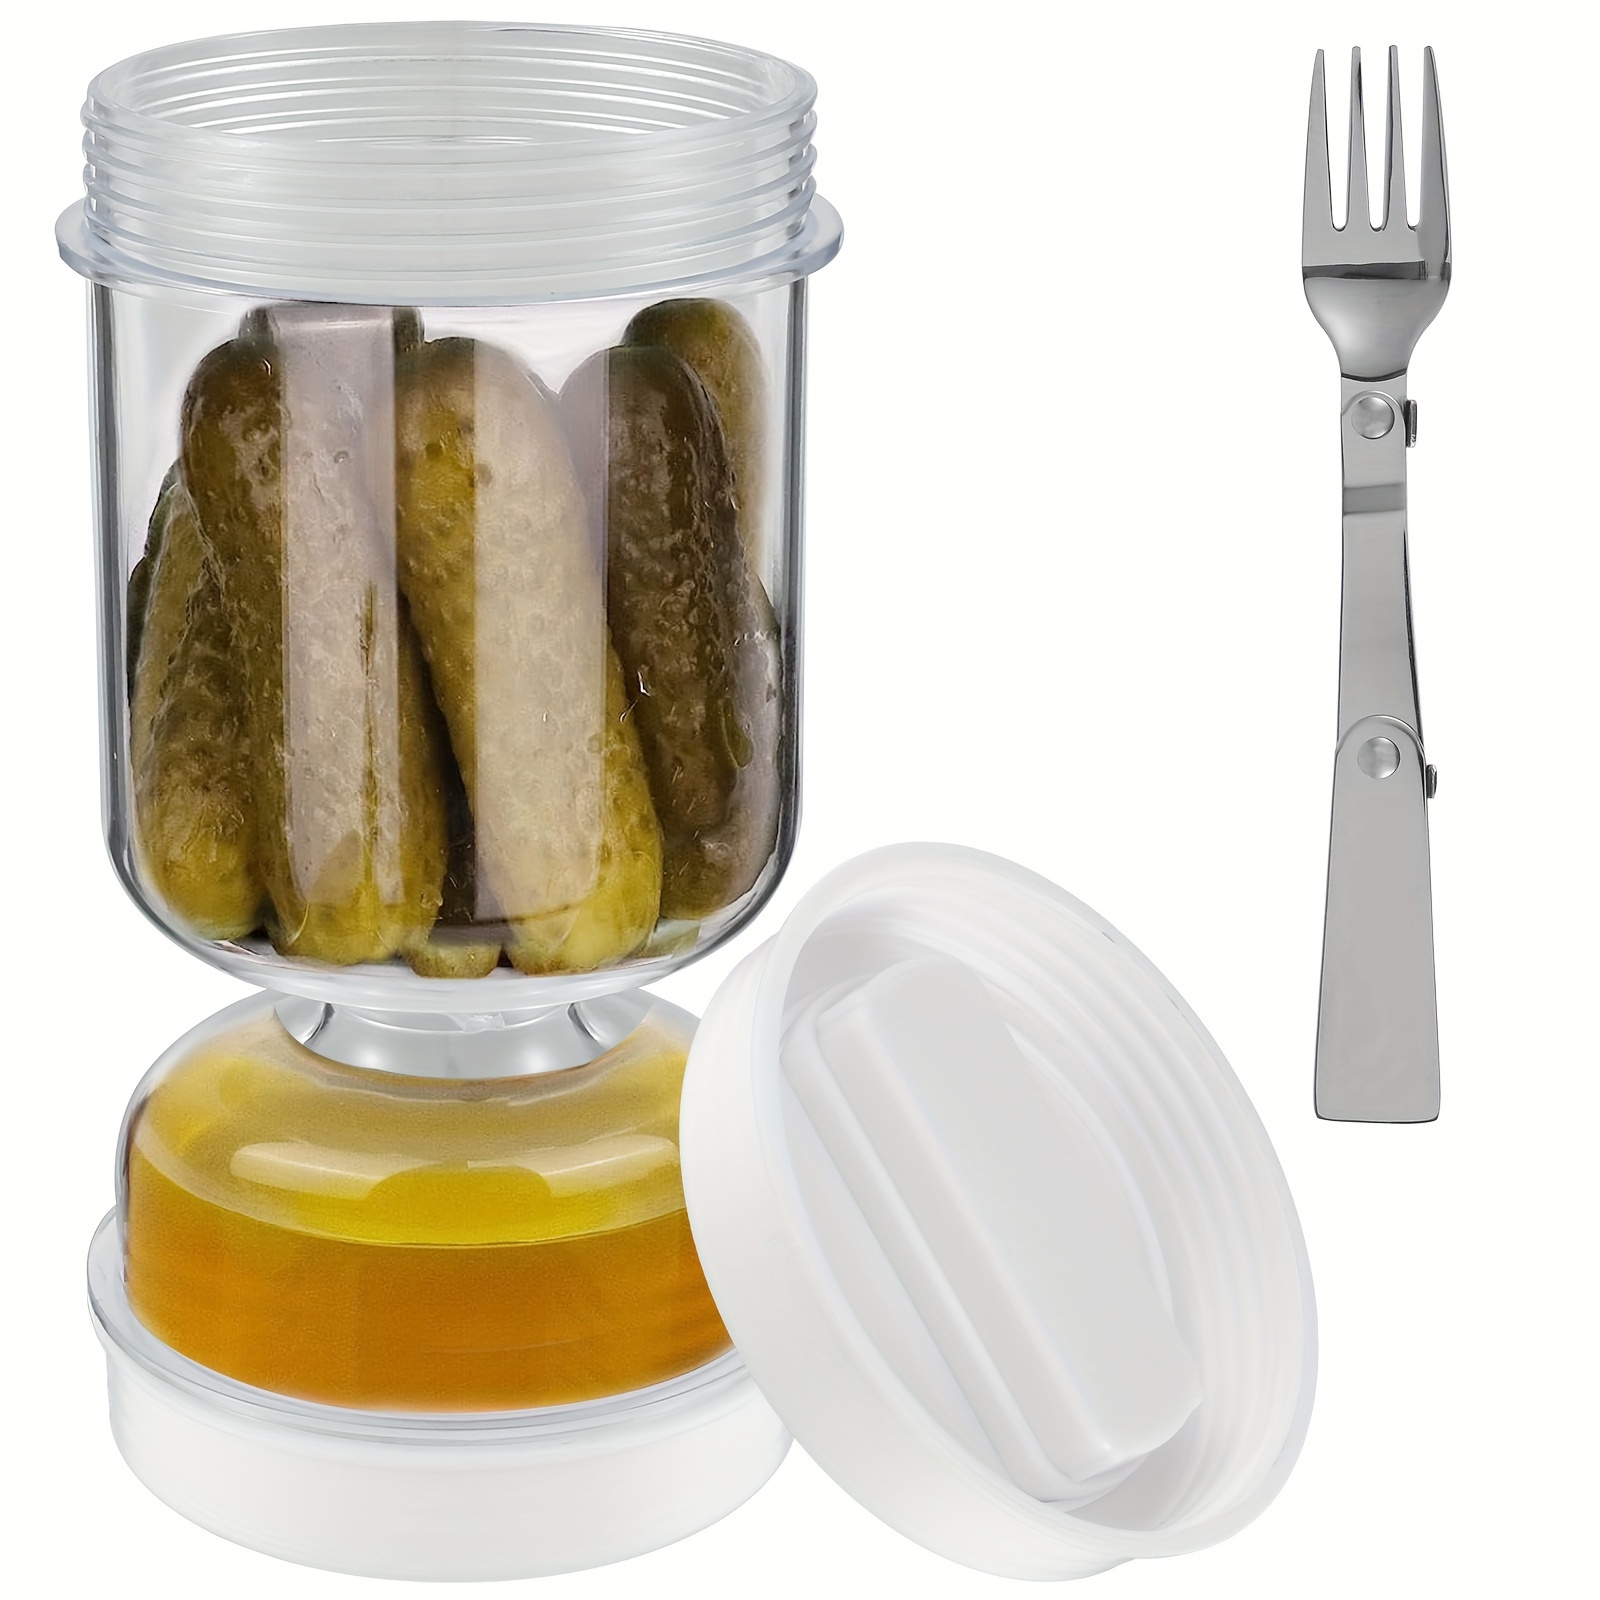 

separate Moisture" Versatile Acrylic Pickle Jar With Fork - Reusable, Round Kitchen Container For Pickles & Olives, Flip-top Lid, Hand Wash Only